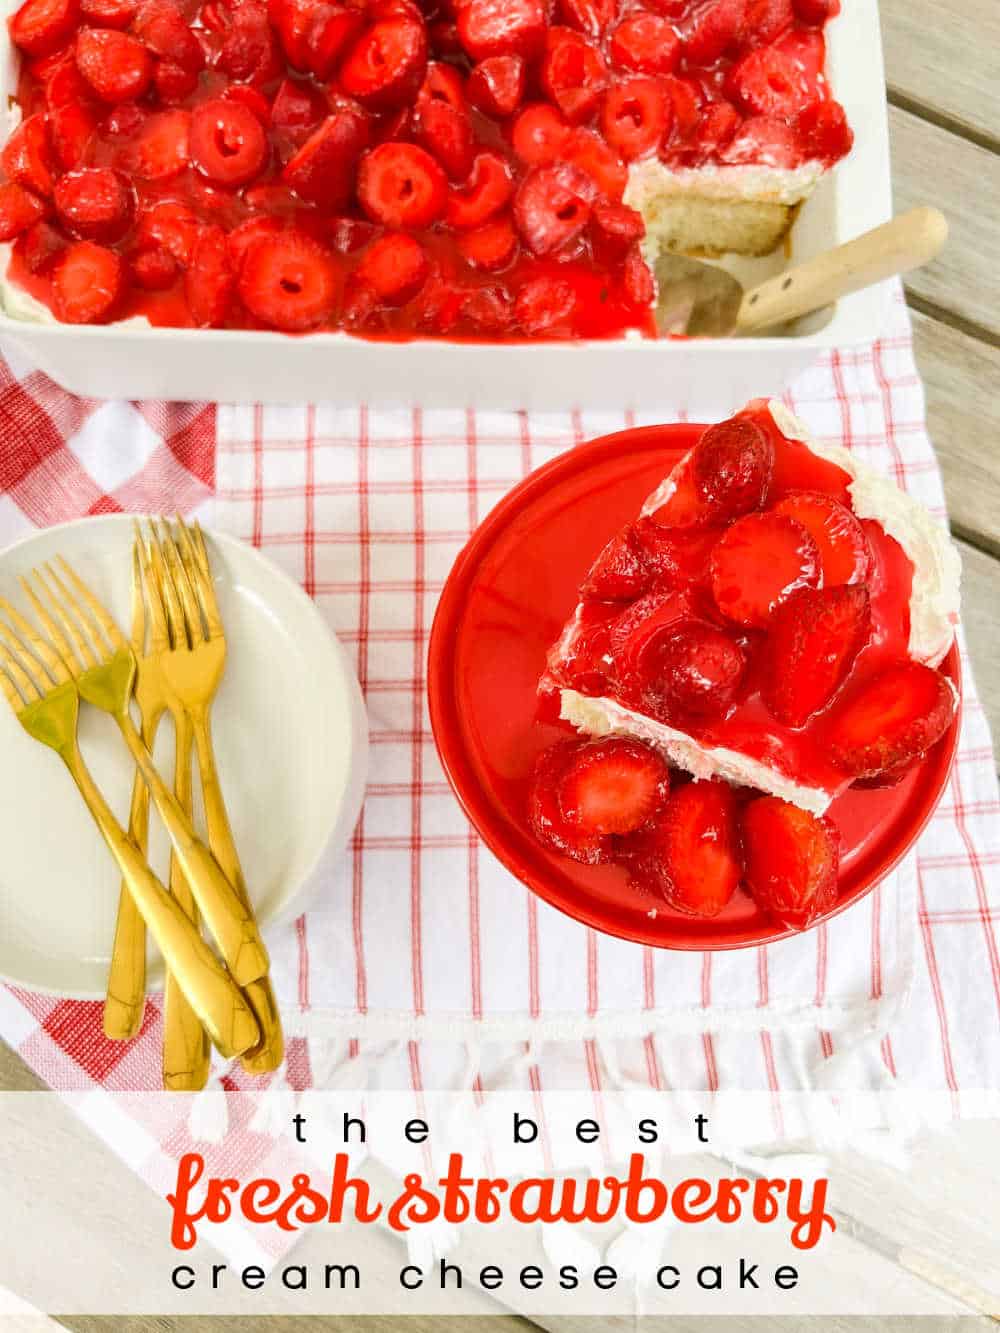 The BEST Fresh Strawberry Cream Cheese Cake Recipe. Moist white cake covered in a fluffy layer of cream cheese and whipped cream with a topping of luscious fresh strawberries in a sweet strawberry glaze. Everyone will fall in love with this delicious, easy cake. 